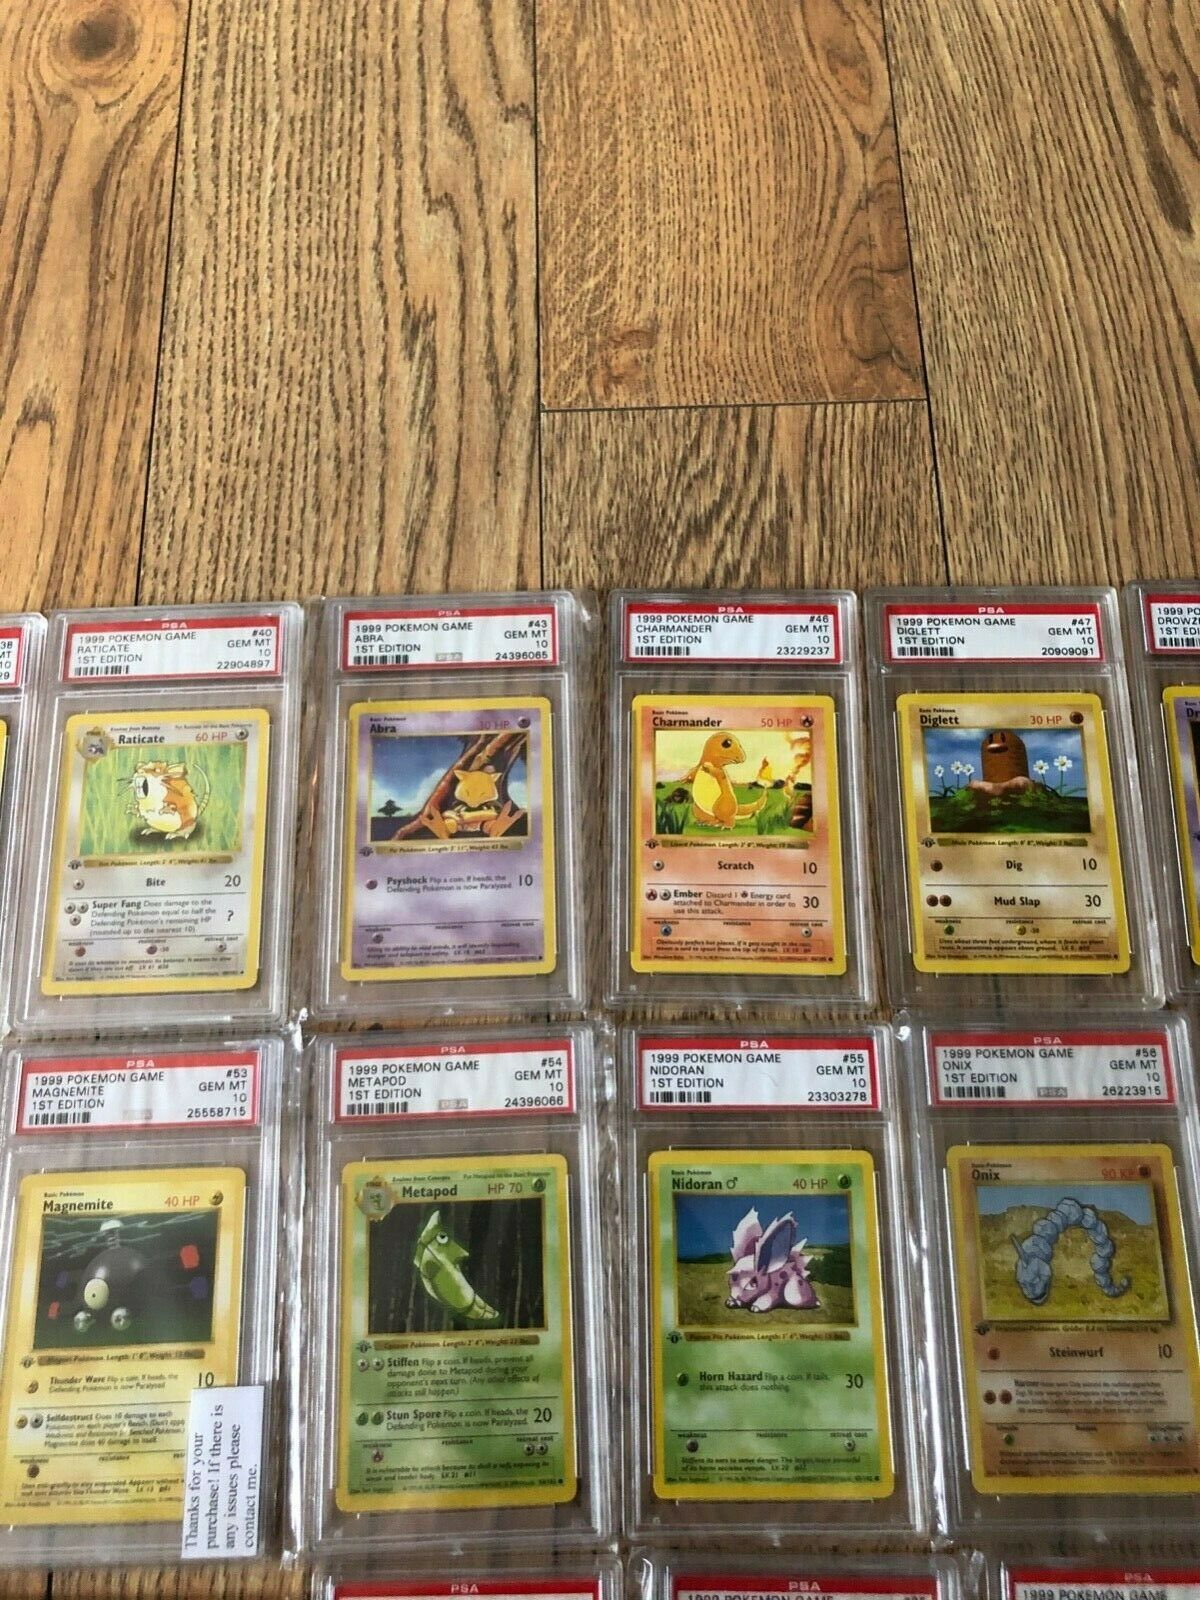 Shadowless first edition psa 10 pokemon cards with original collectors album